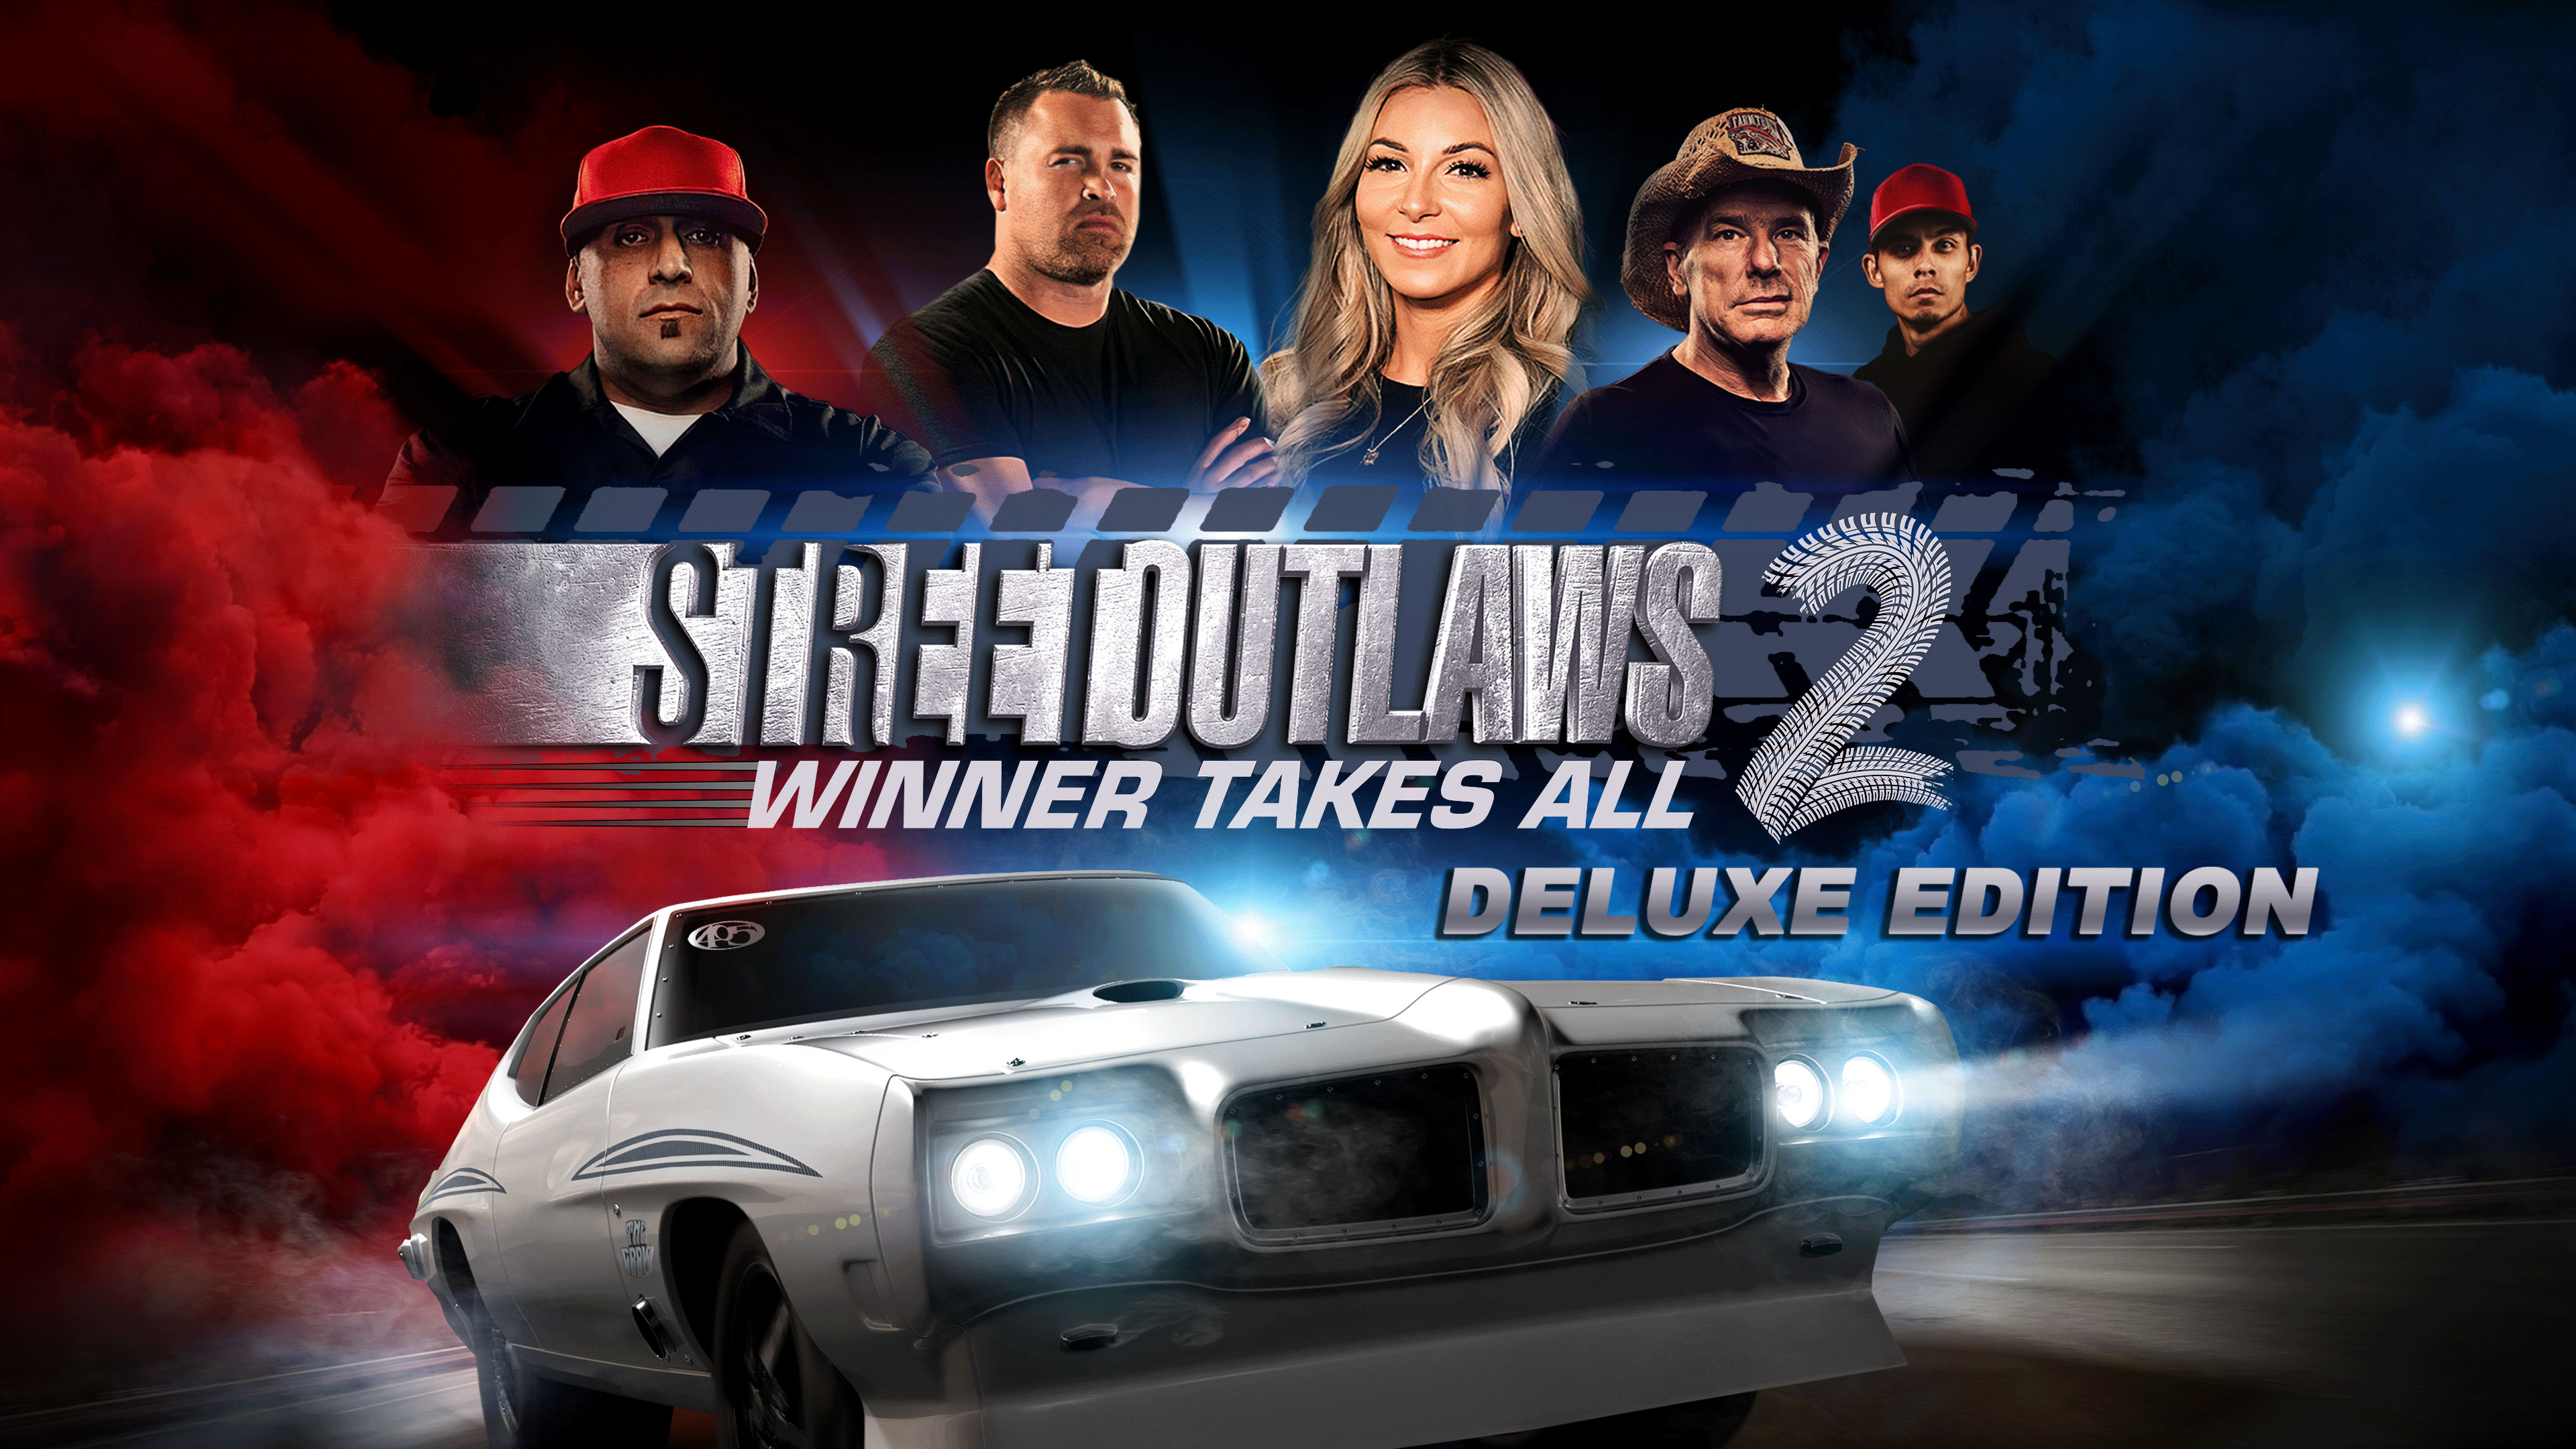 3840x2160 Street Outlaws 2: Winner Takes All